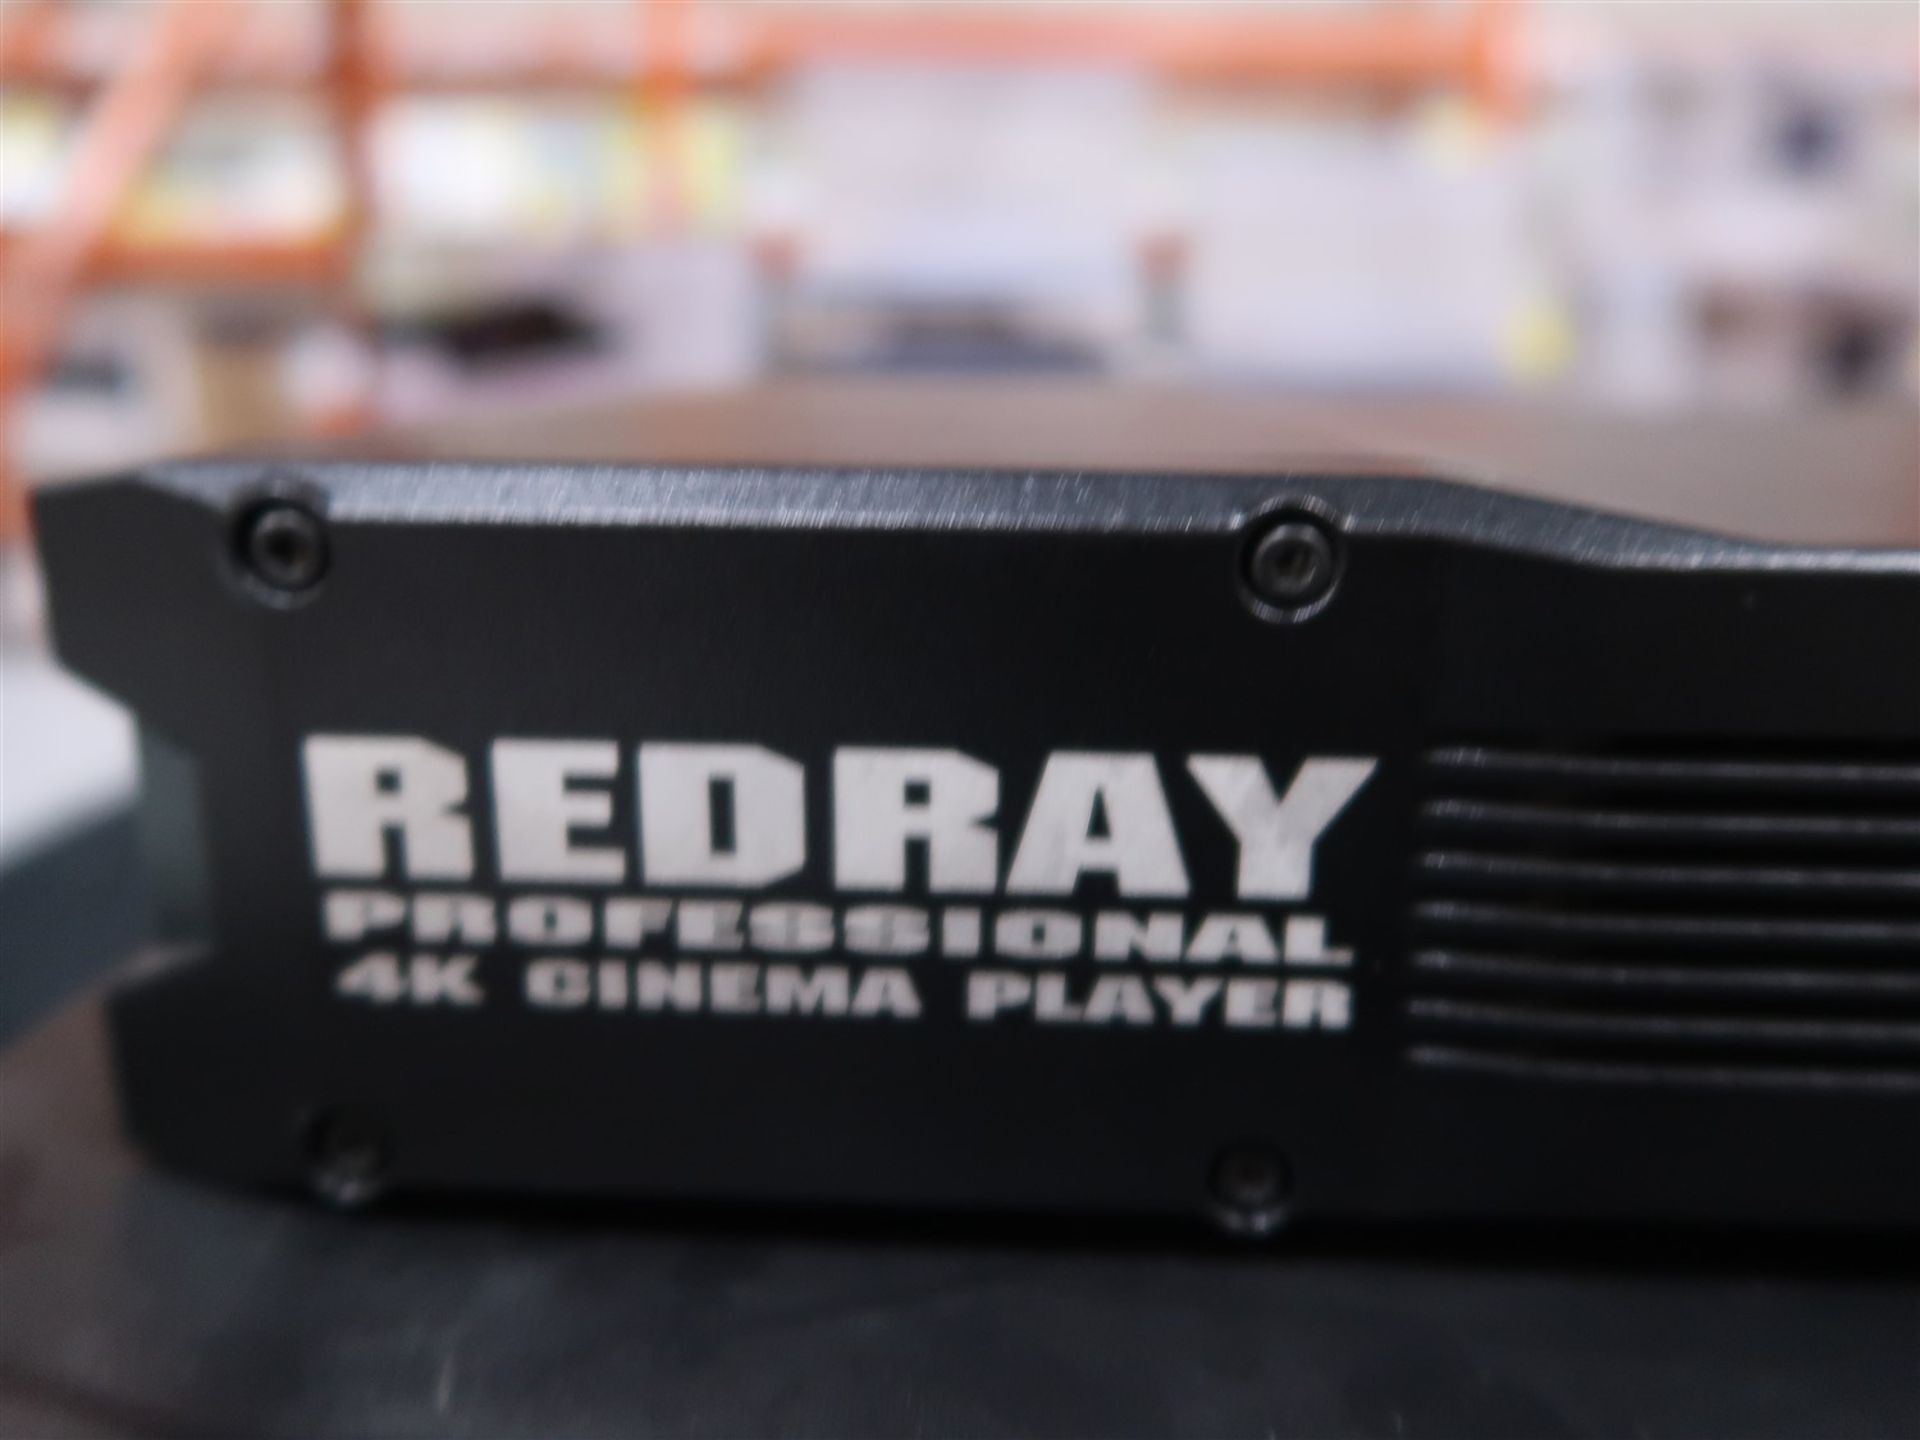 RED RAY PROFESSIONAL 4K CINEMA PLAYER - Image 2 of 3